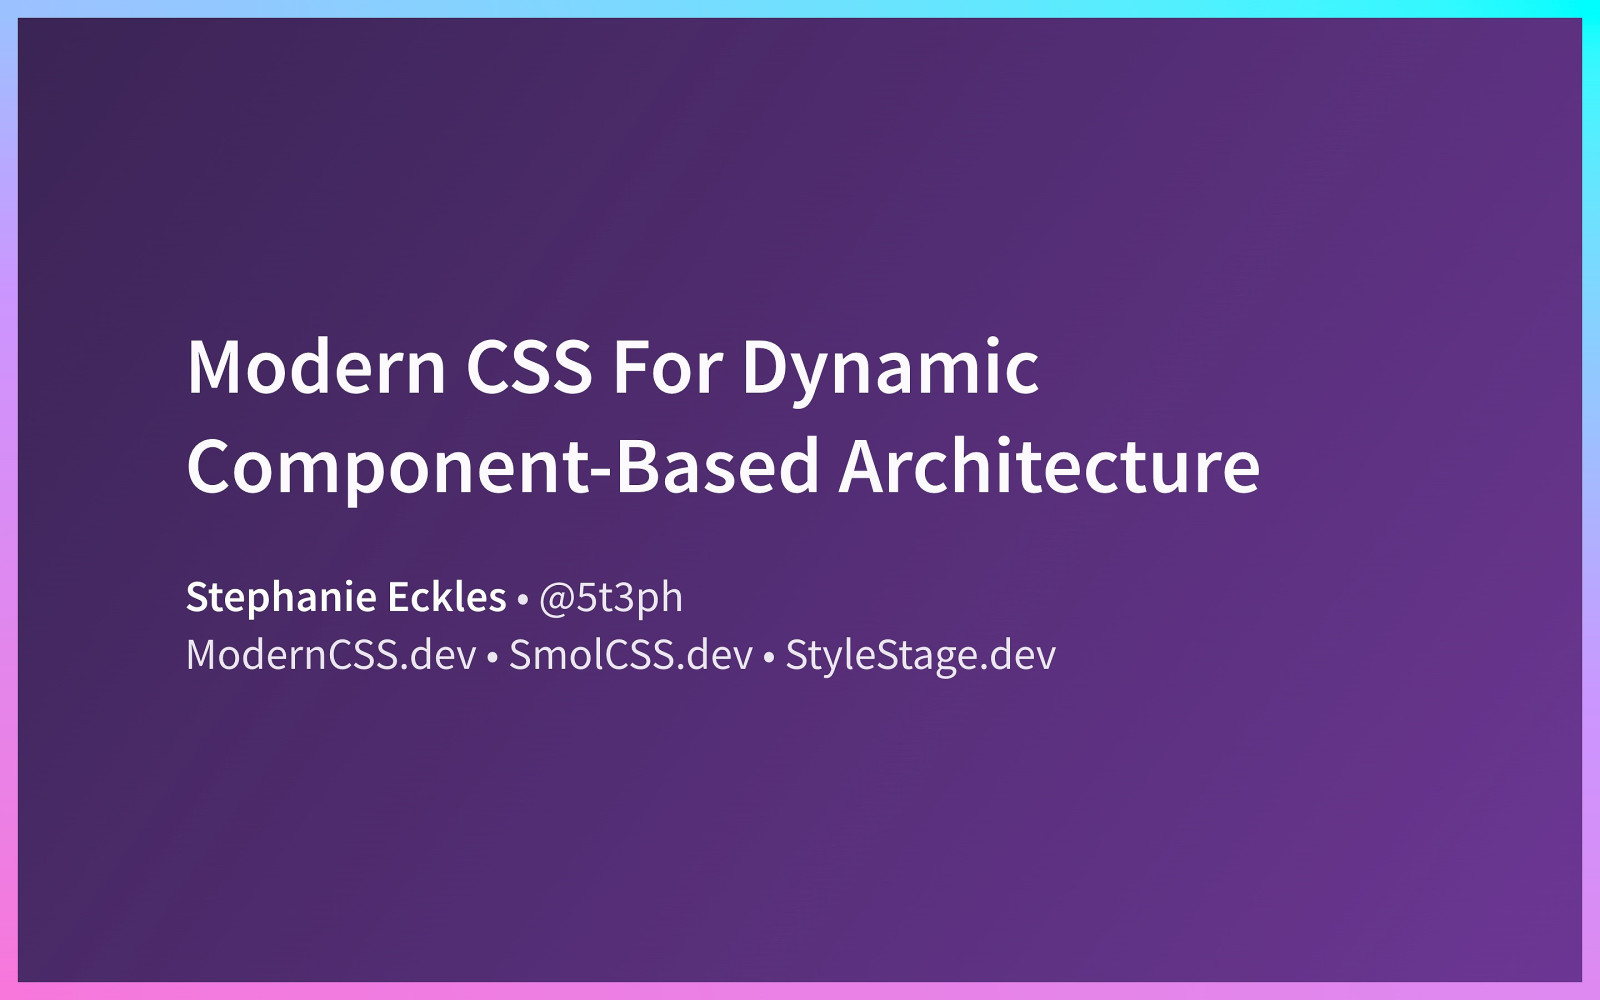 Modern CSS For Dynamic Component-Based Architecture